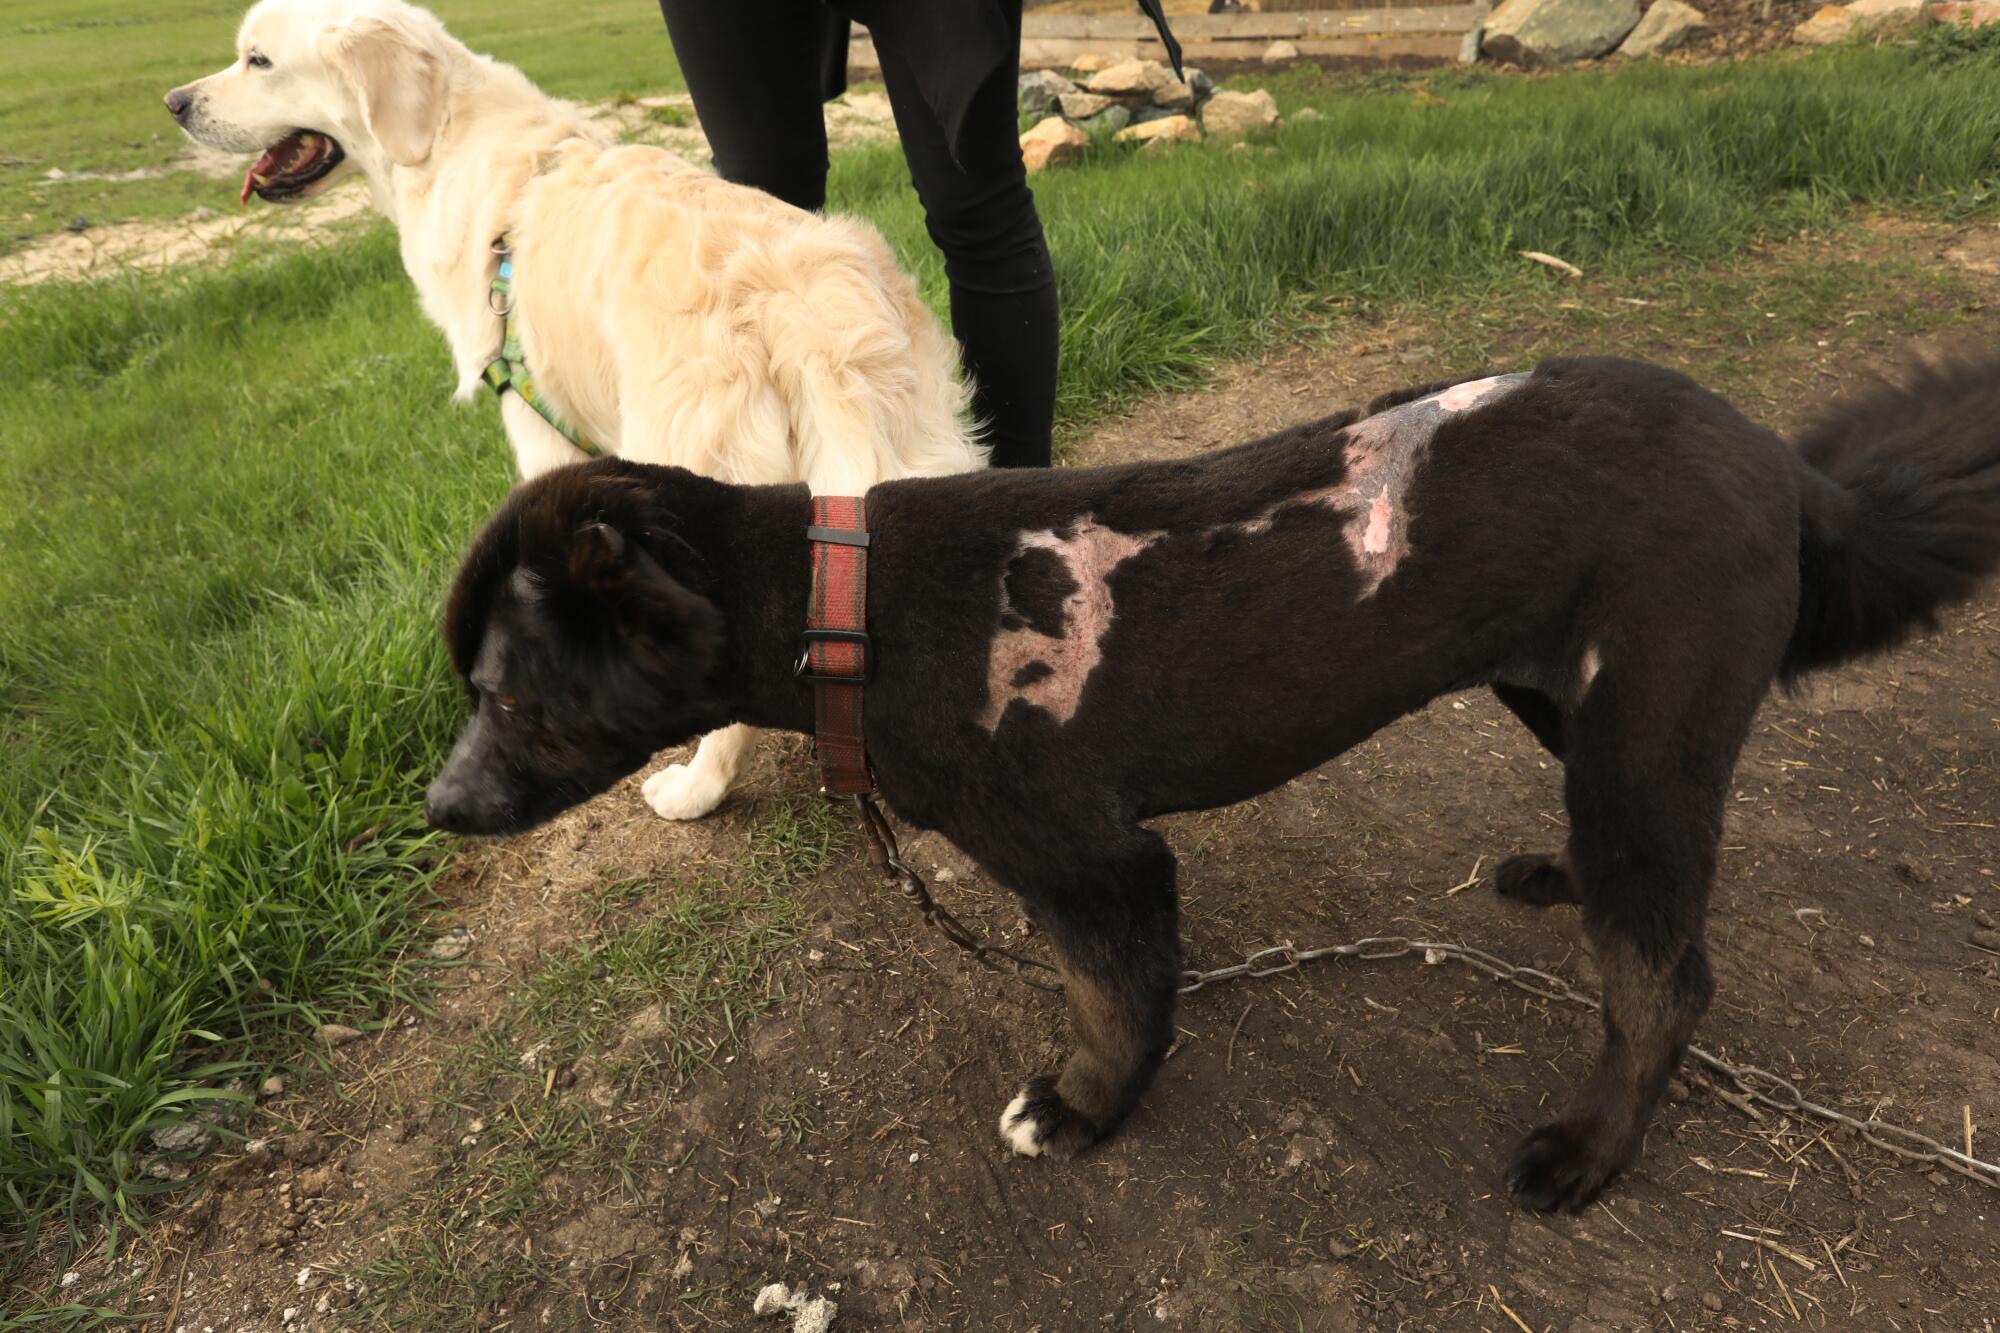 Two dogs, one with burn scars on her back